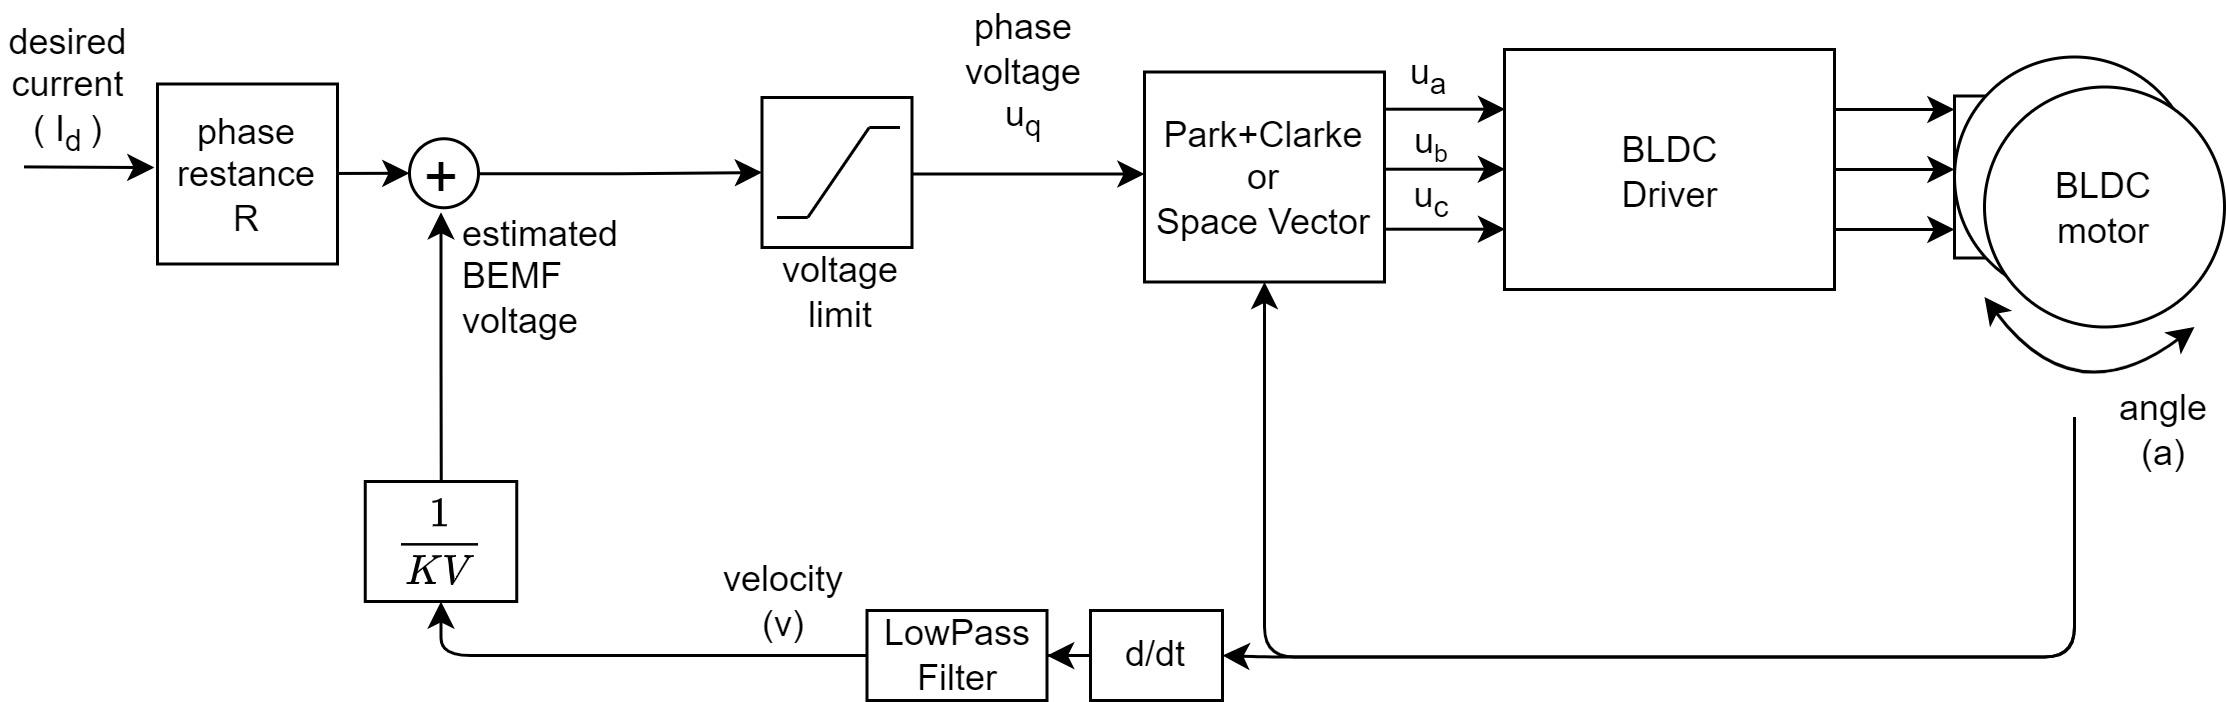 Voltage control with current estimation and Back-EMF compensation
, HangX-Ma